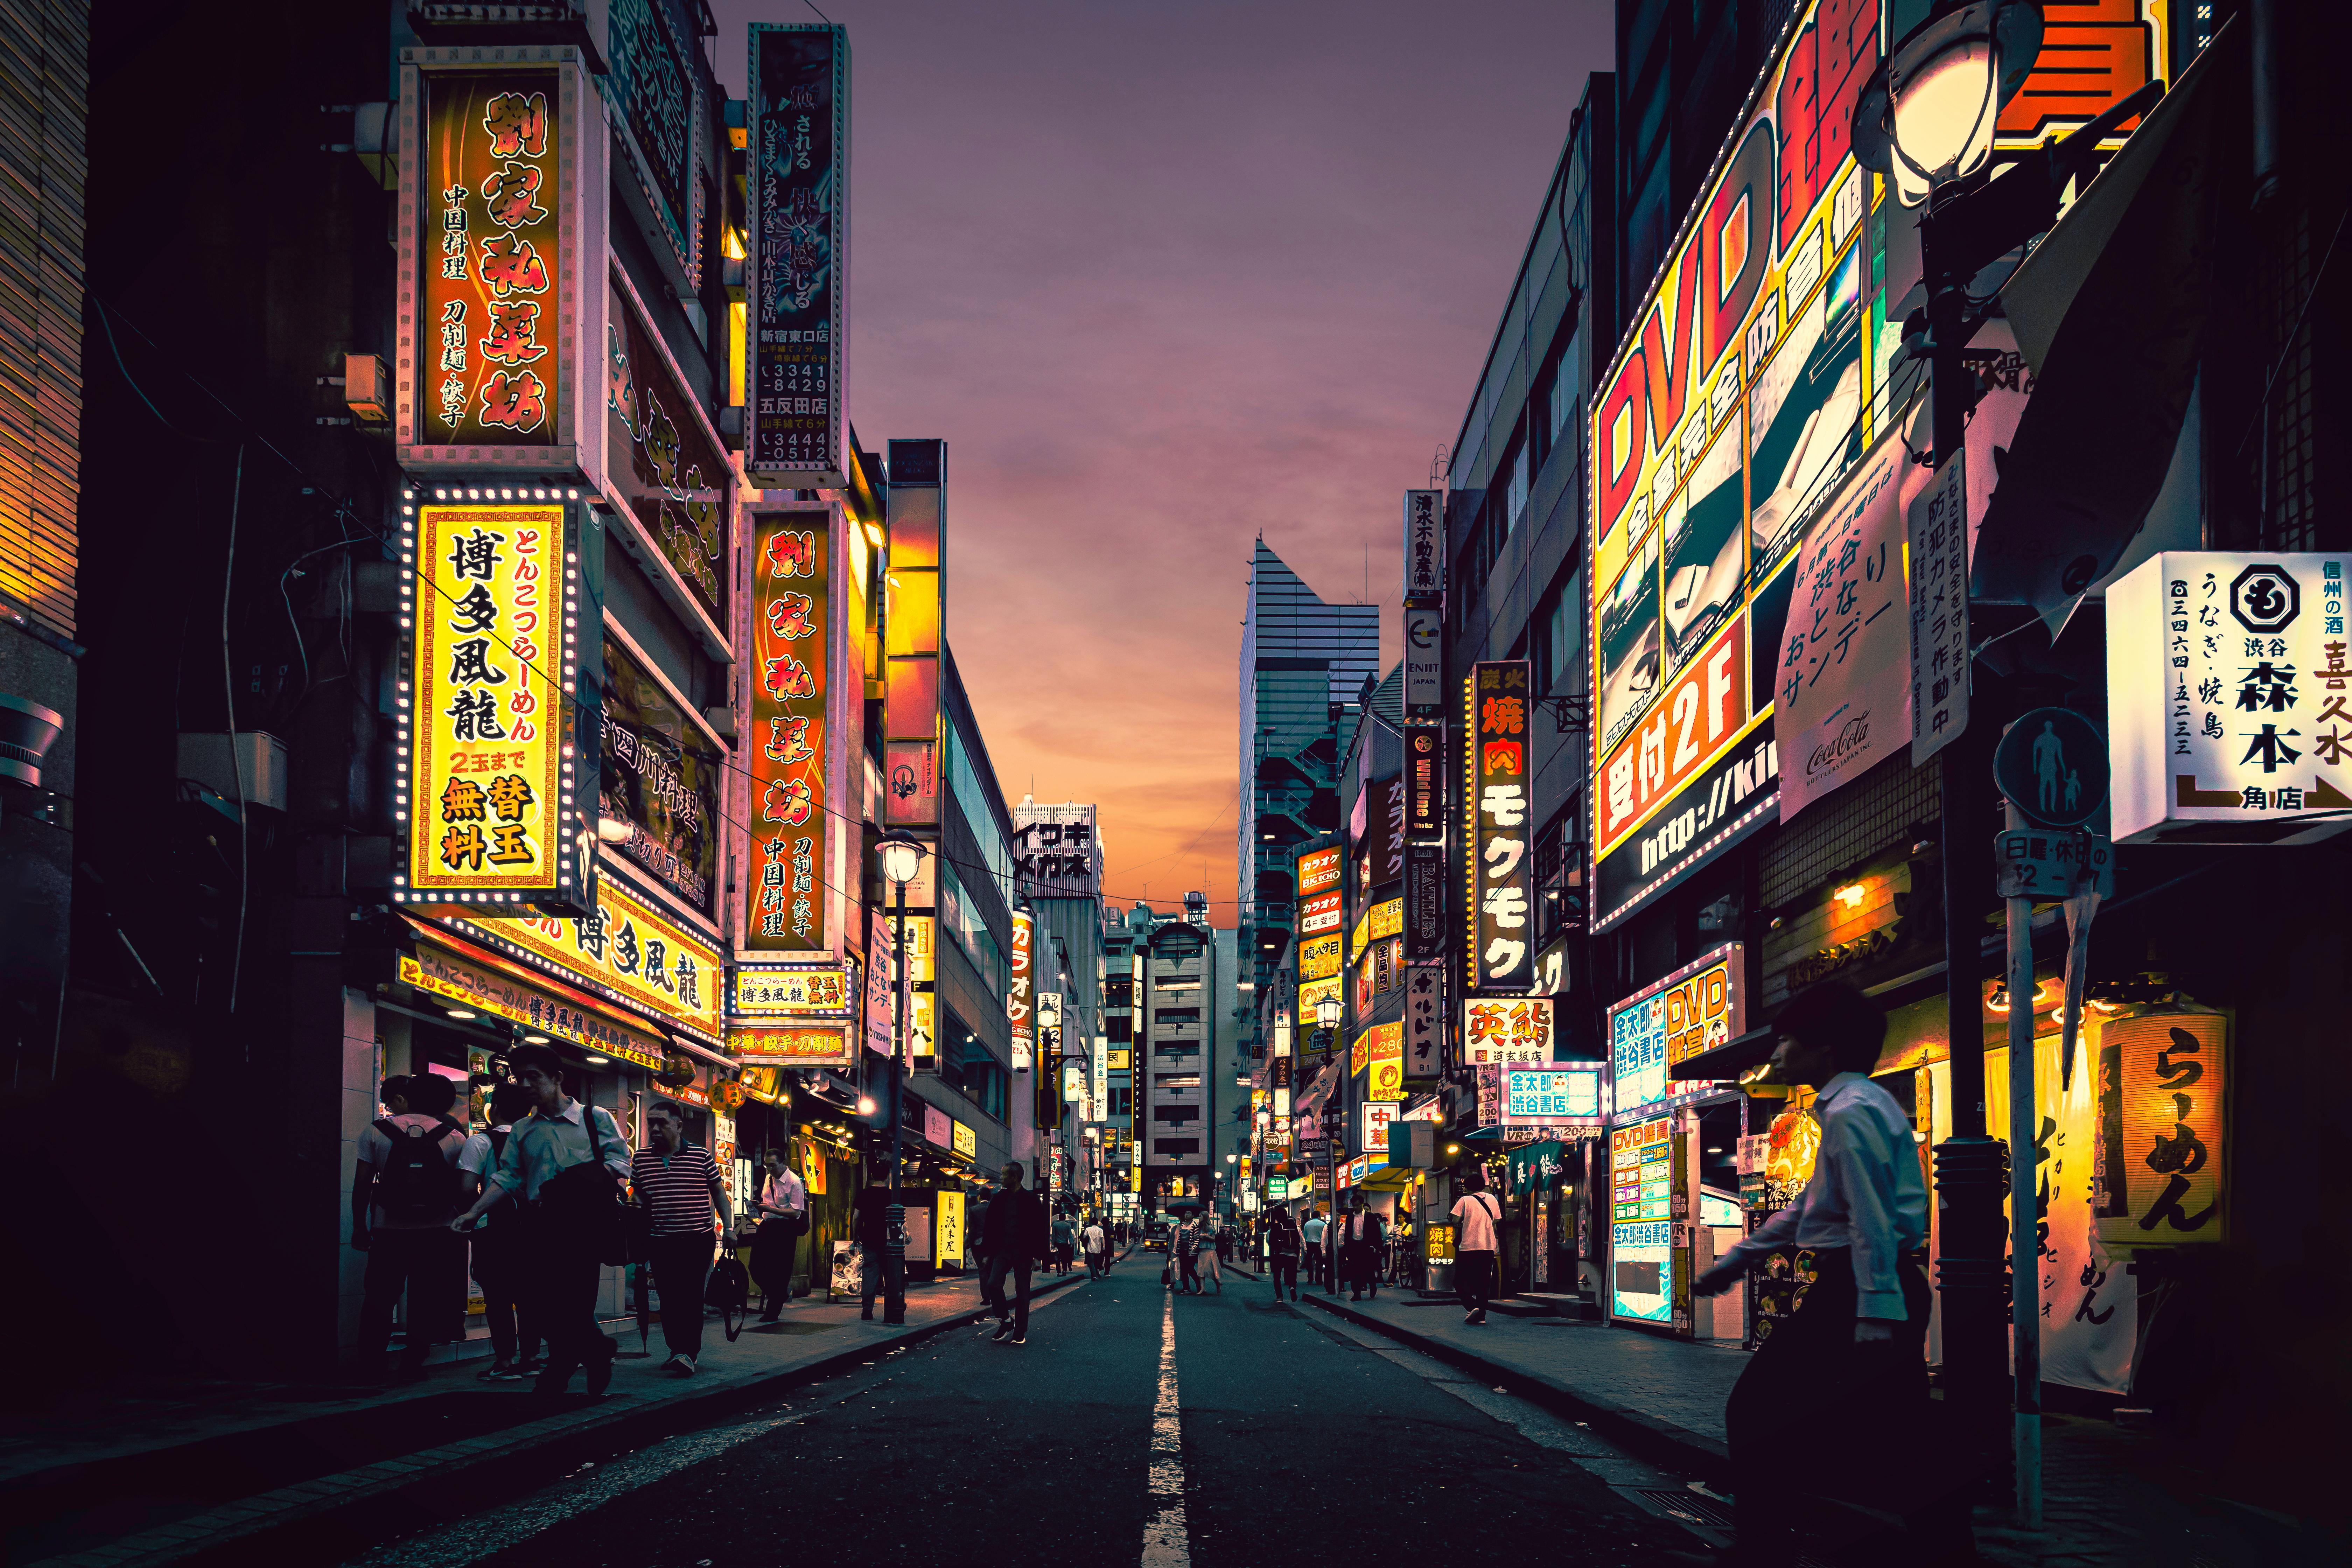 A Japanese street lit up at night